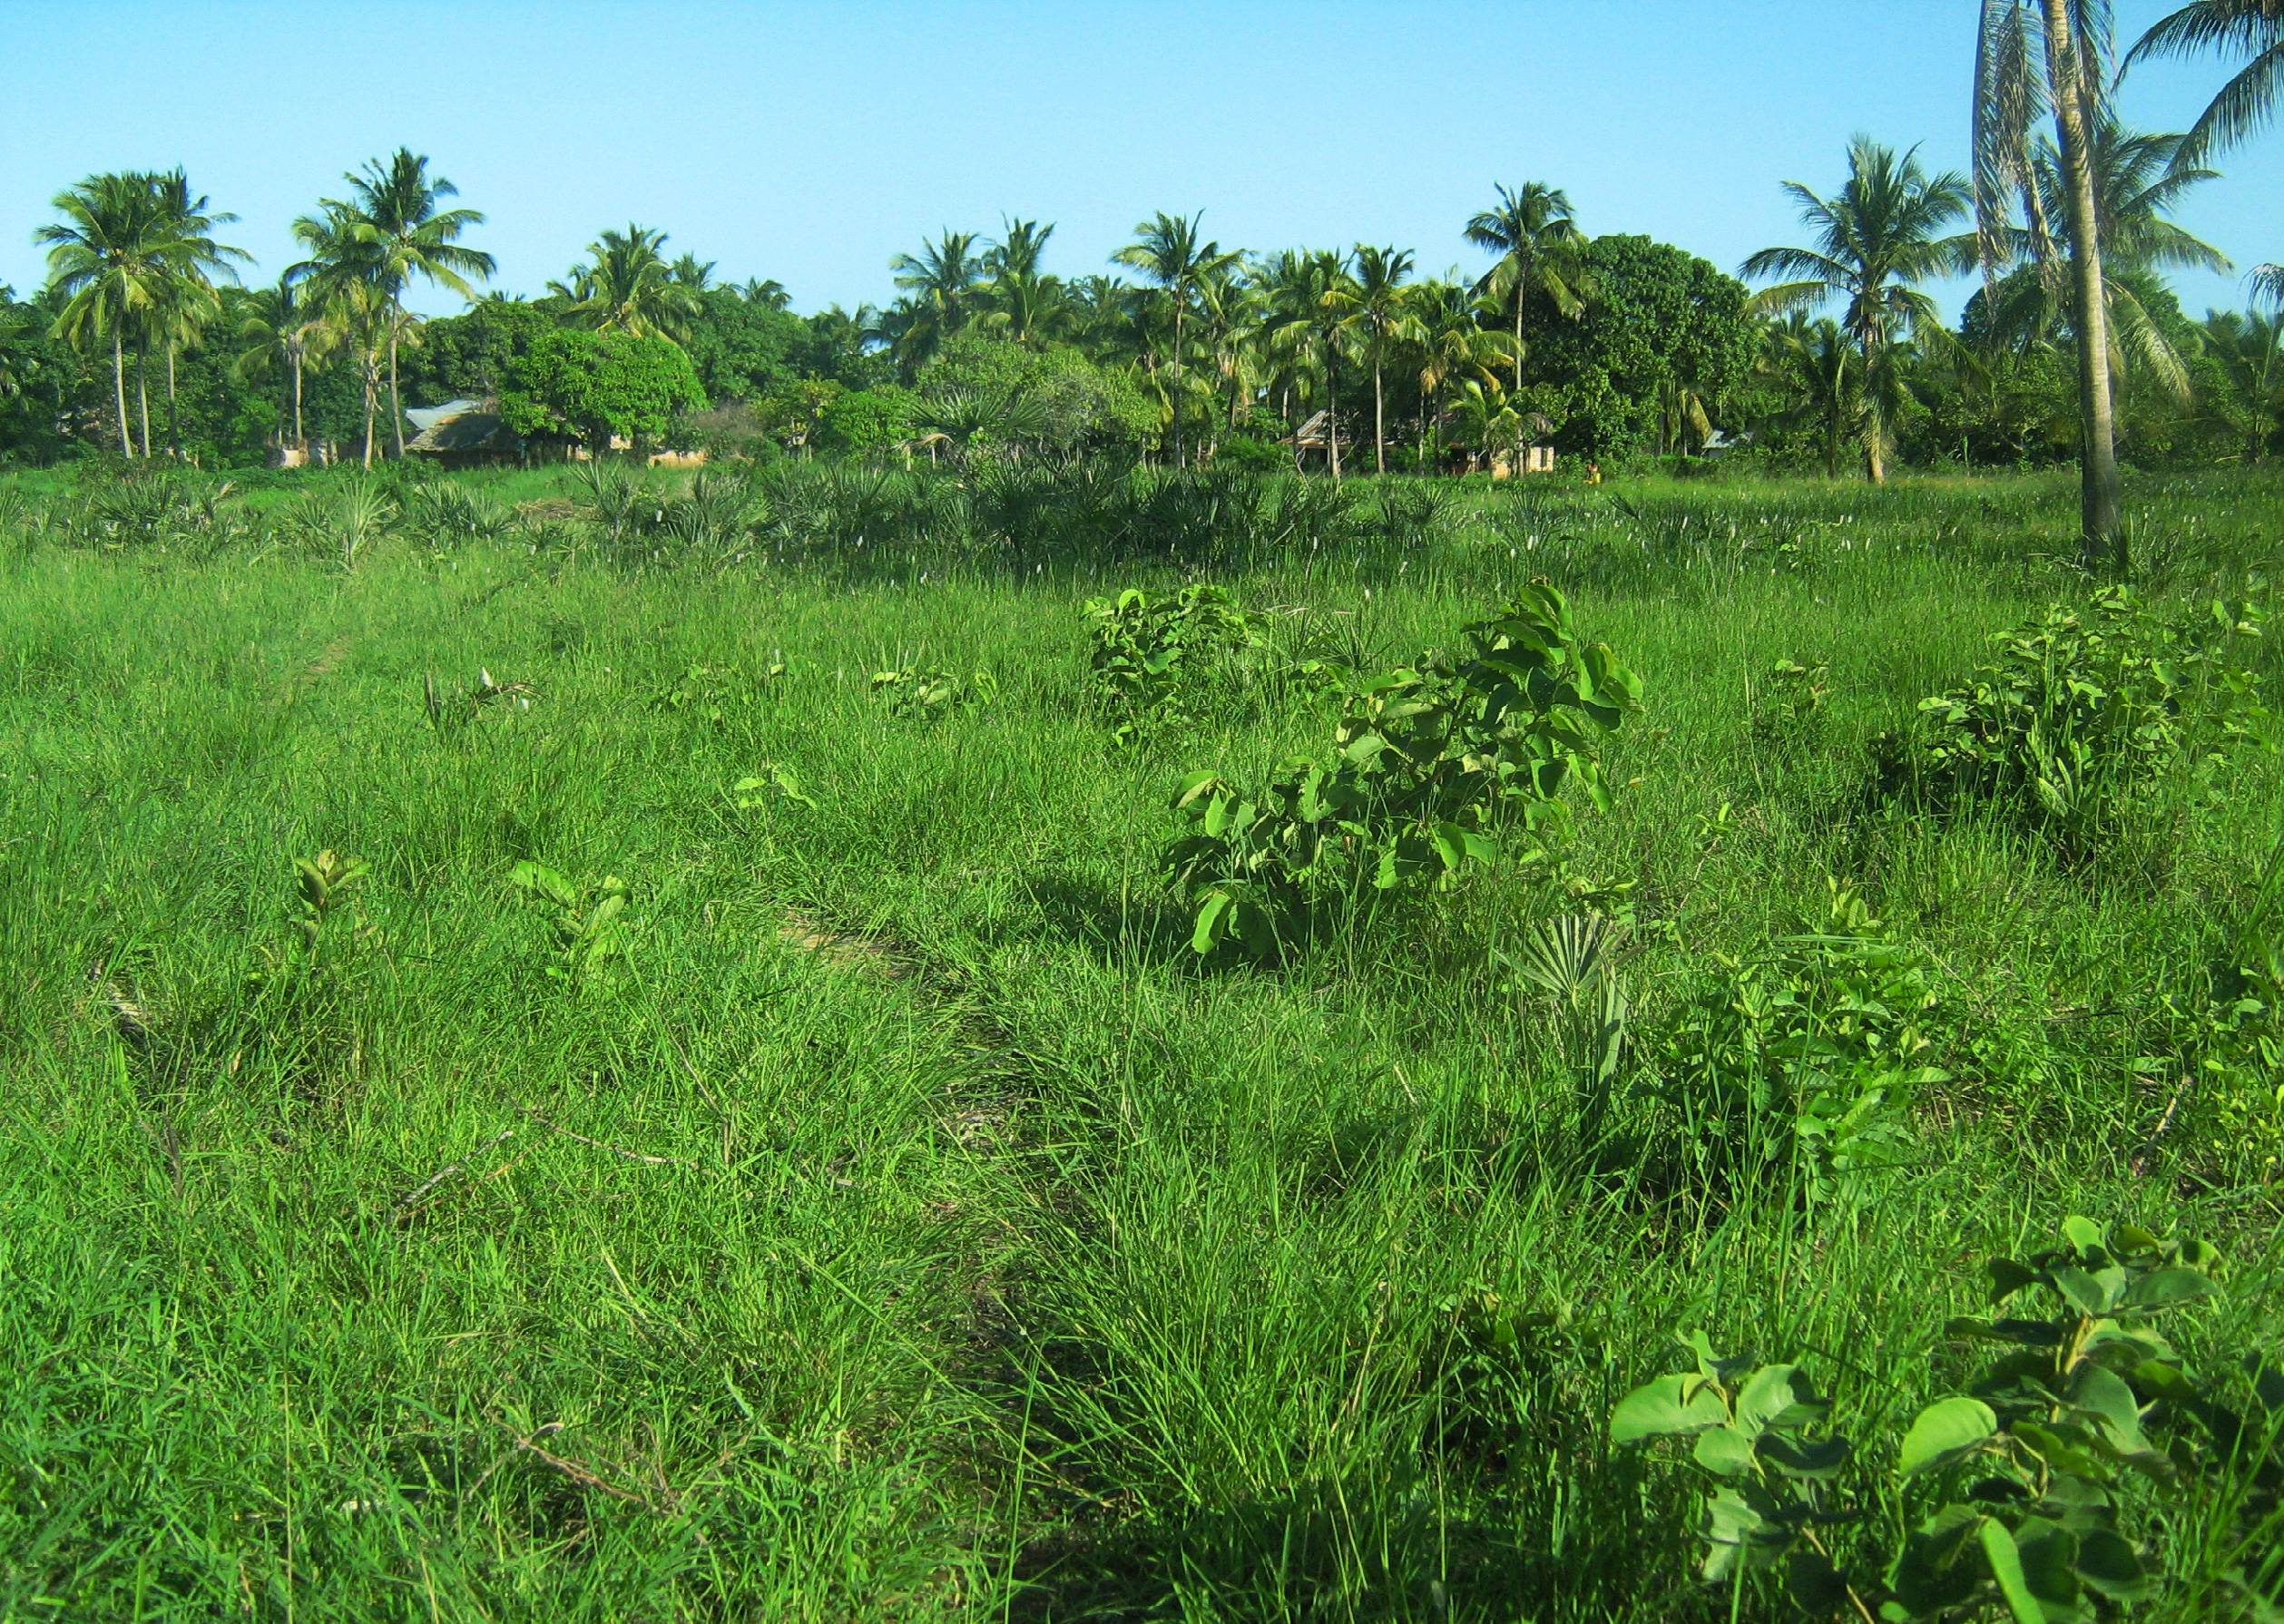 ¼ Acre Secured Plots In An Estate, Diani